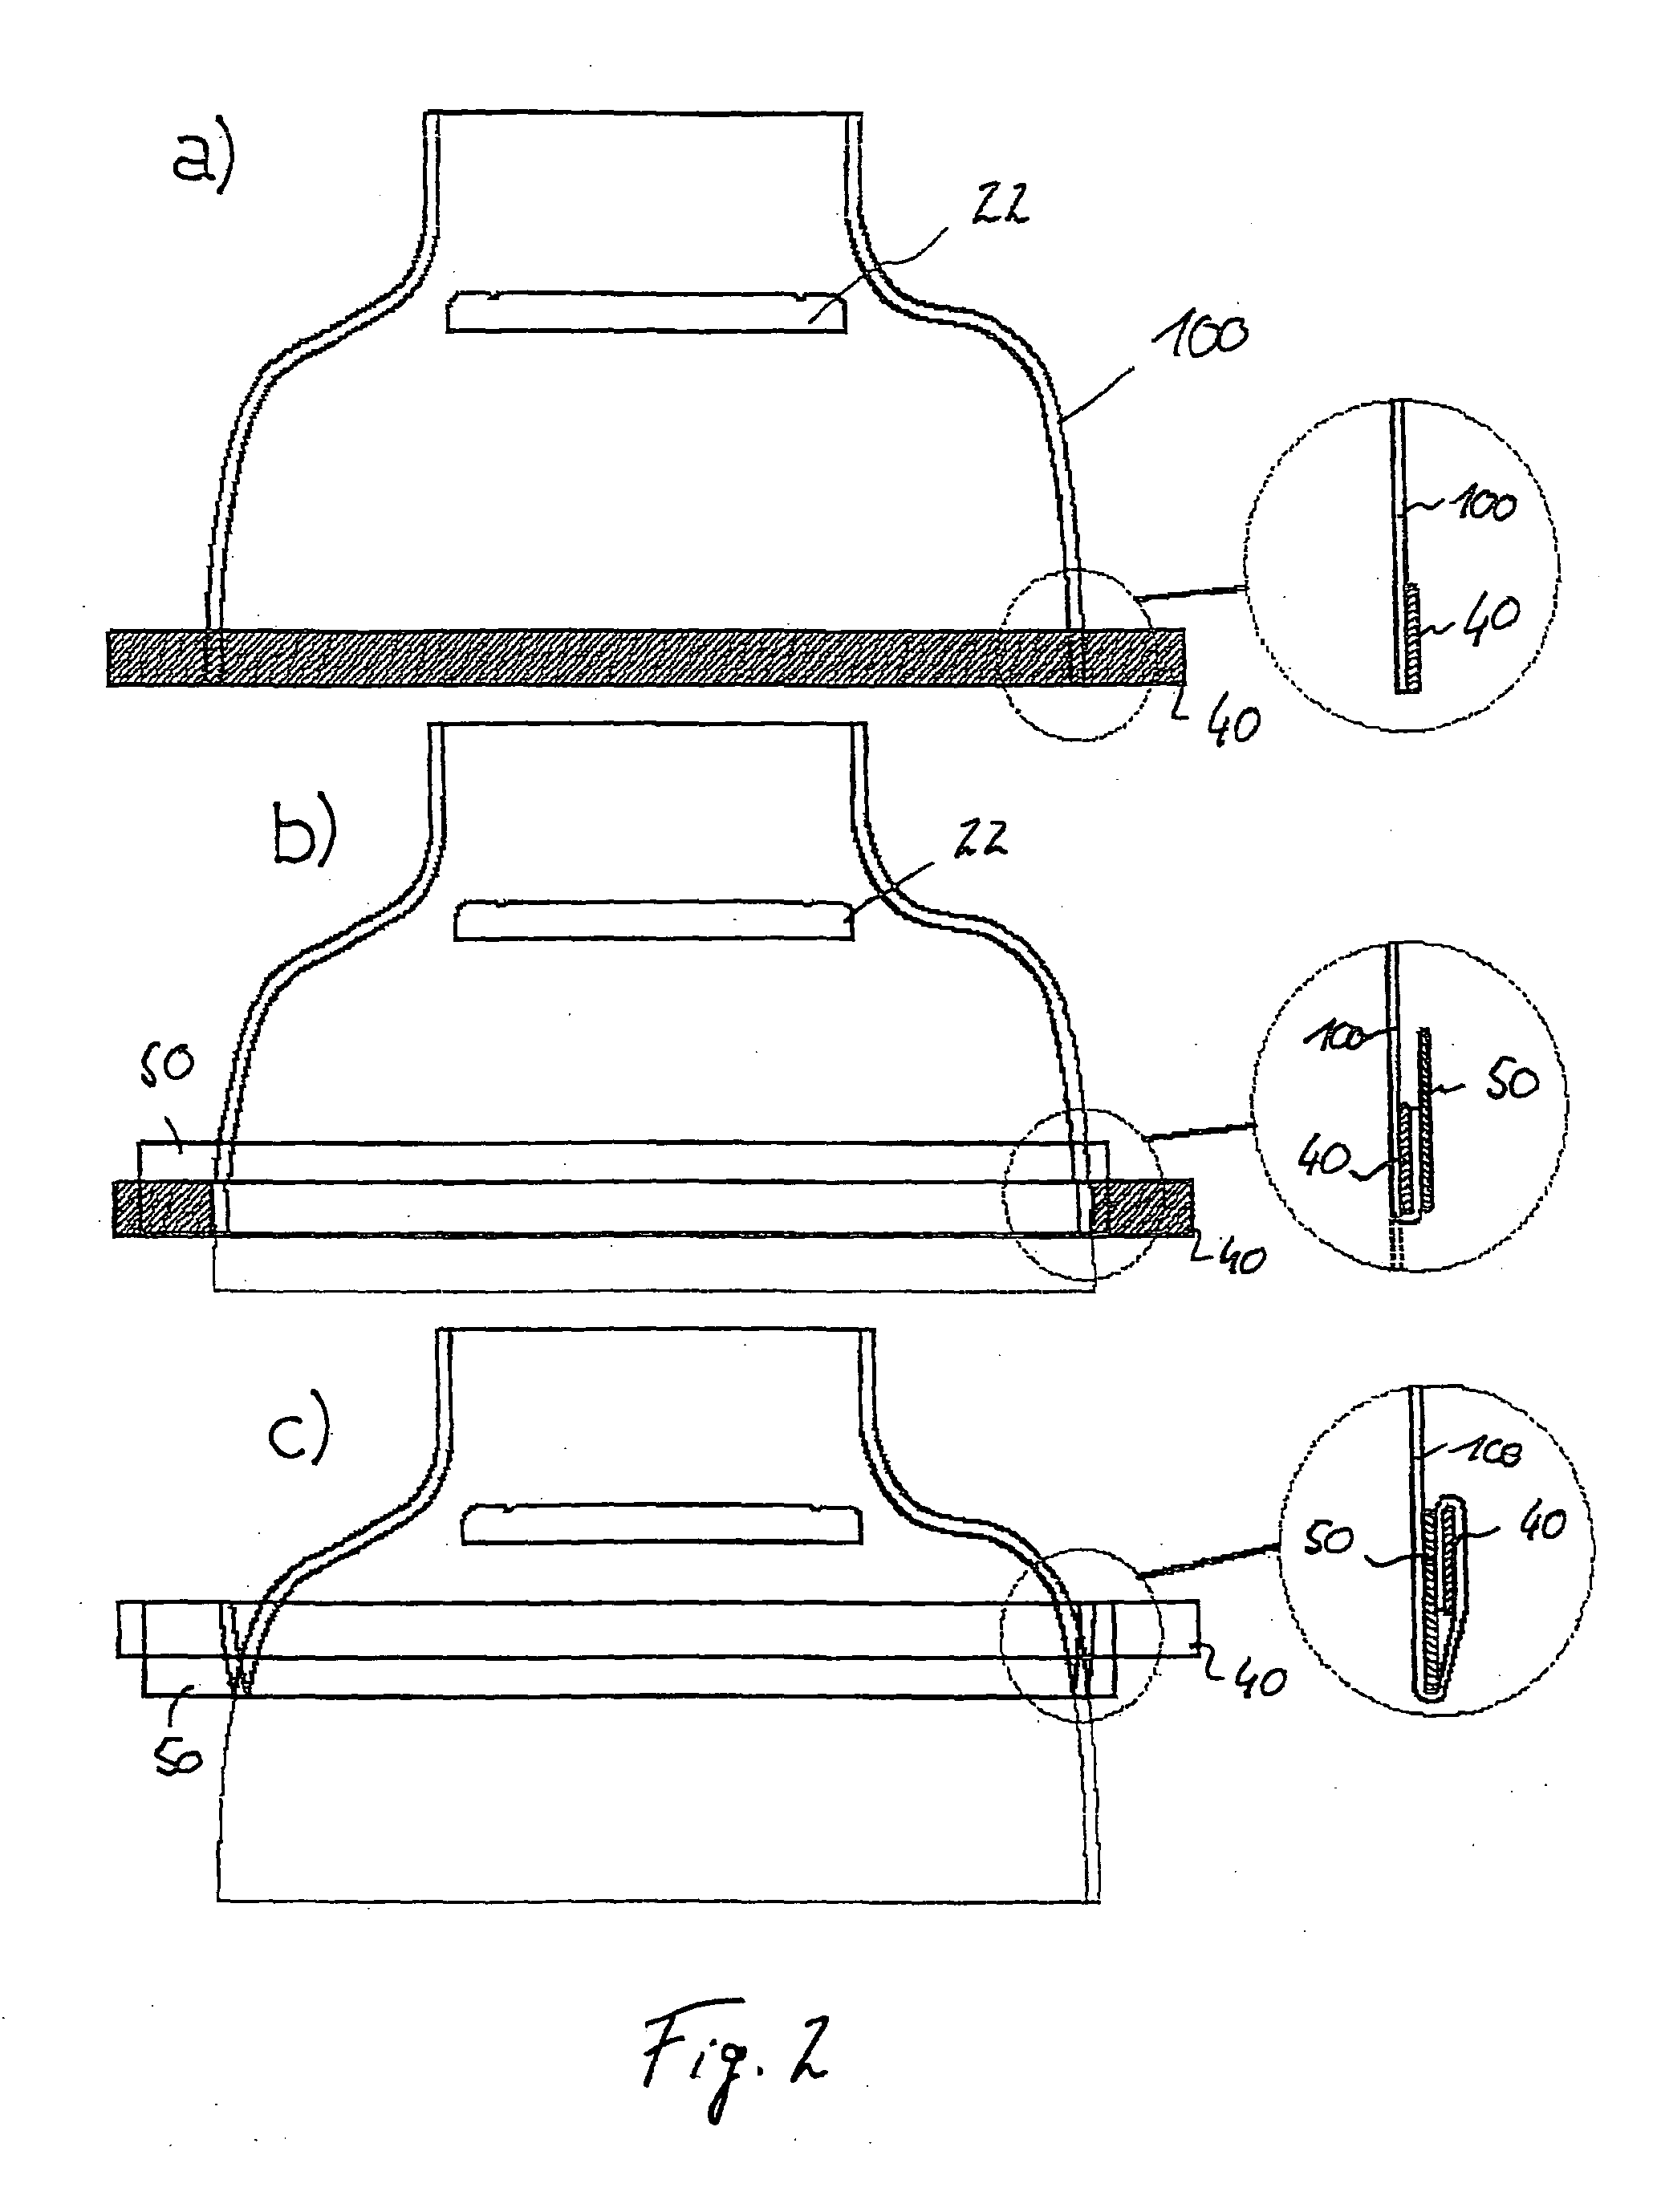 Apparatus for Protecting the Knee Region of a Vehicle Occupant